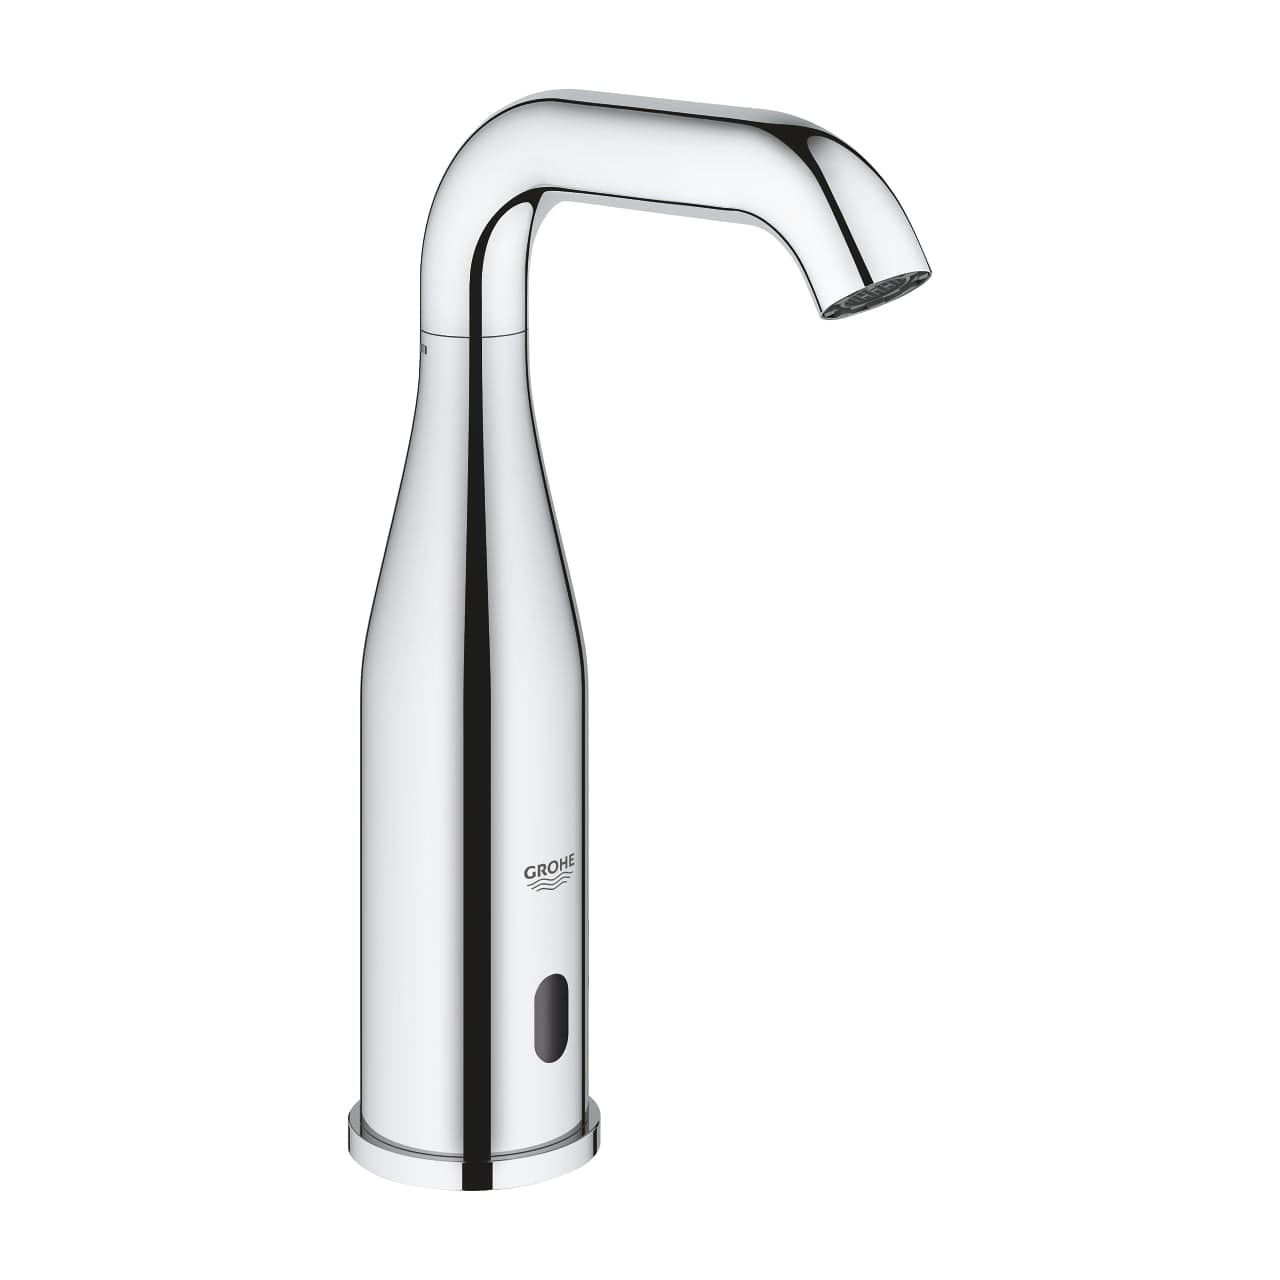 Grohe Essence E Infra-red Electronic Basin Tap 1/2", Chrome | Supply Master | Accra, Ghana Bathroom Faucet Buy Tools hardware Building materials